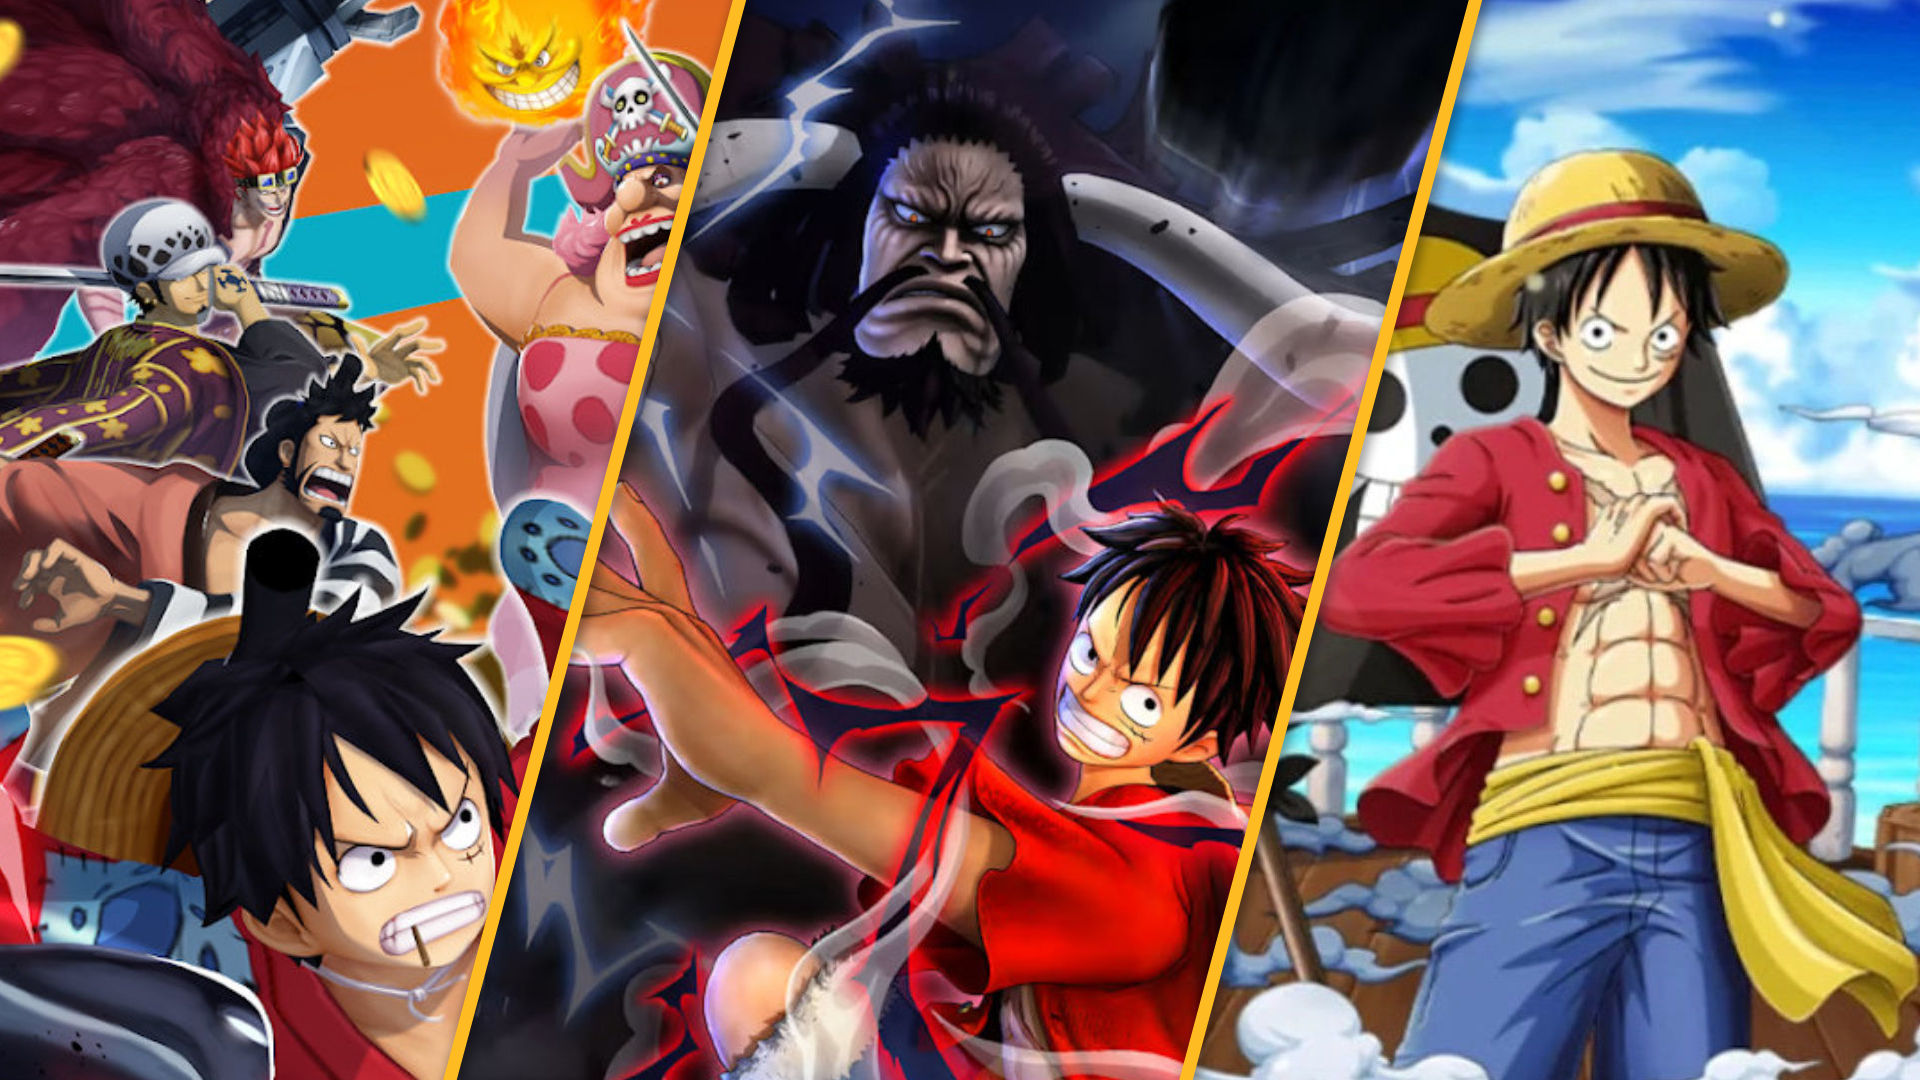 Join the Straw Hats with the best One Piece games